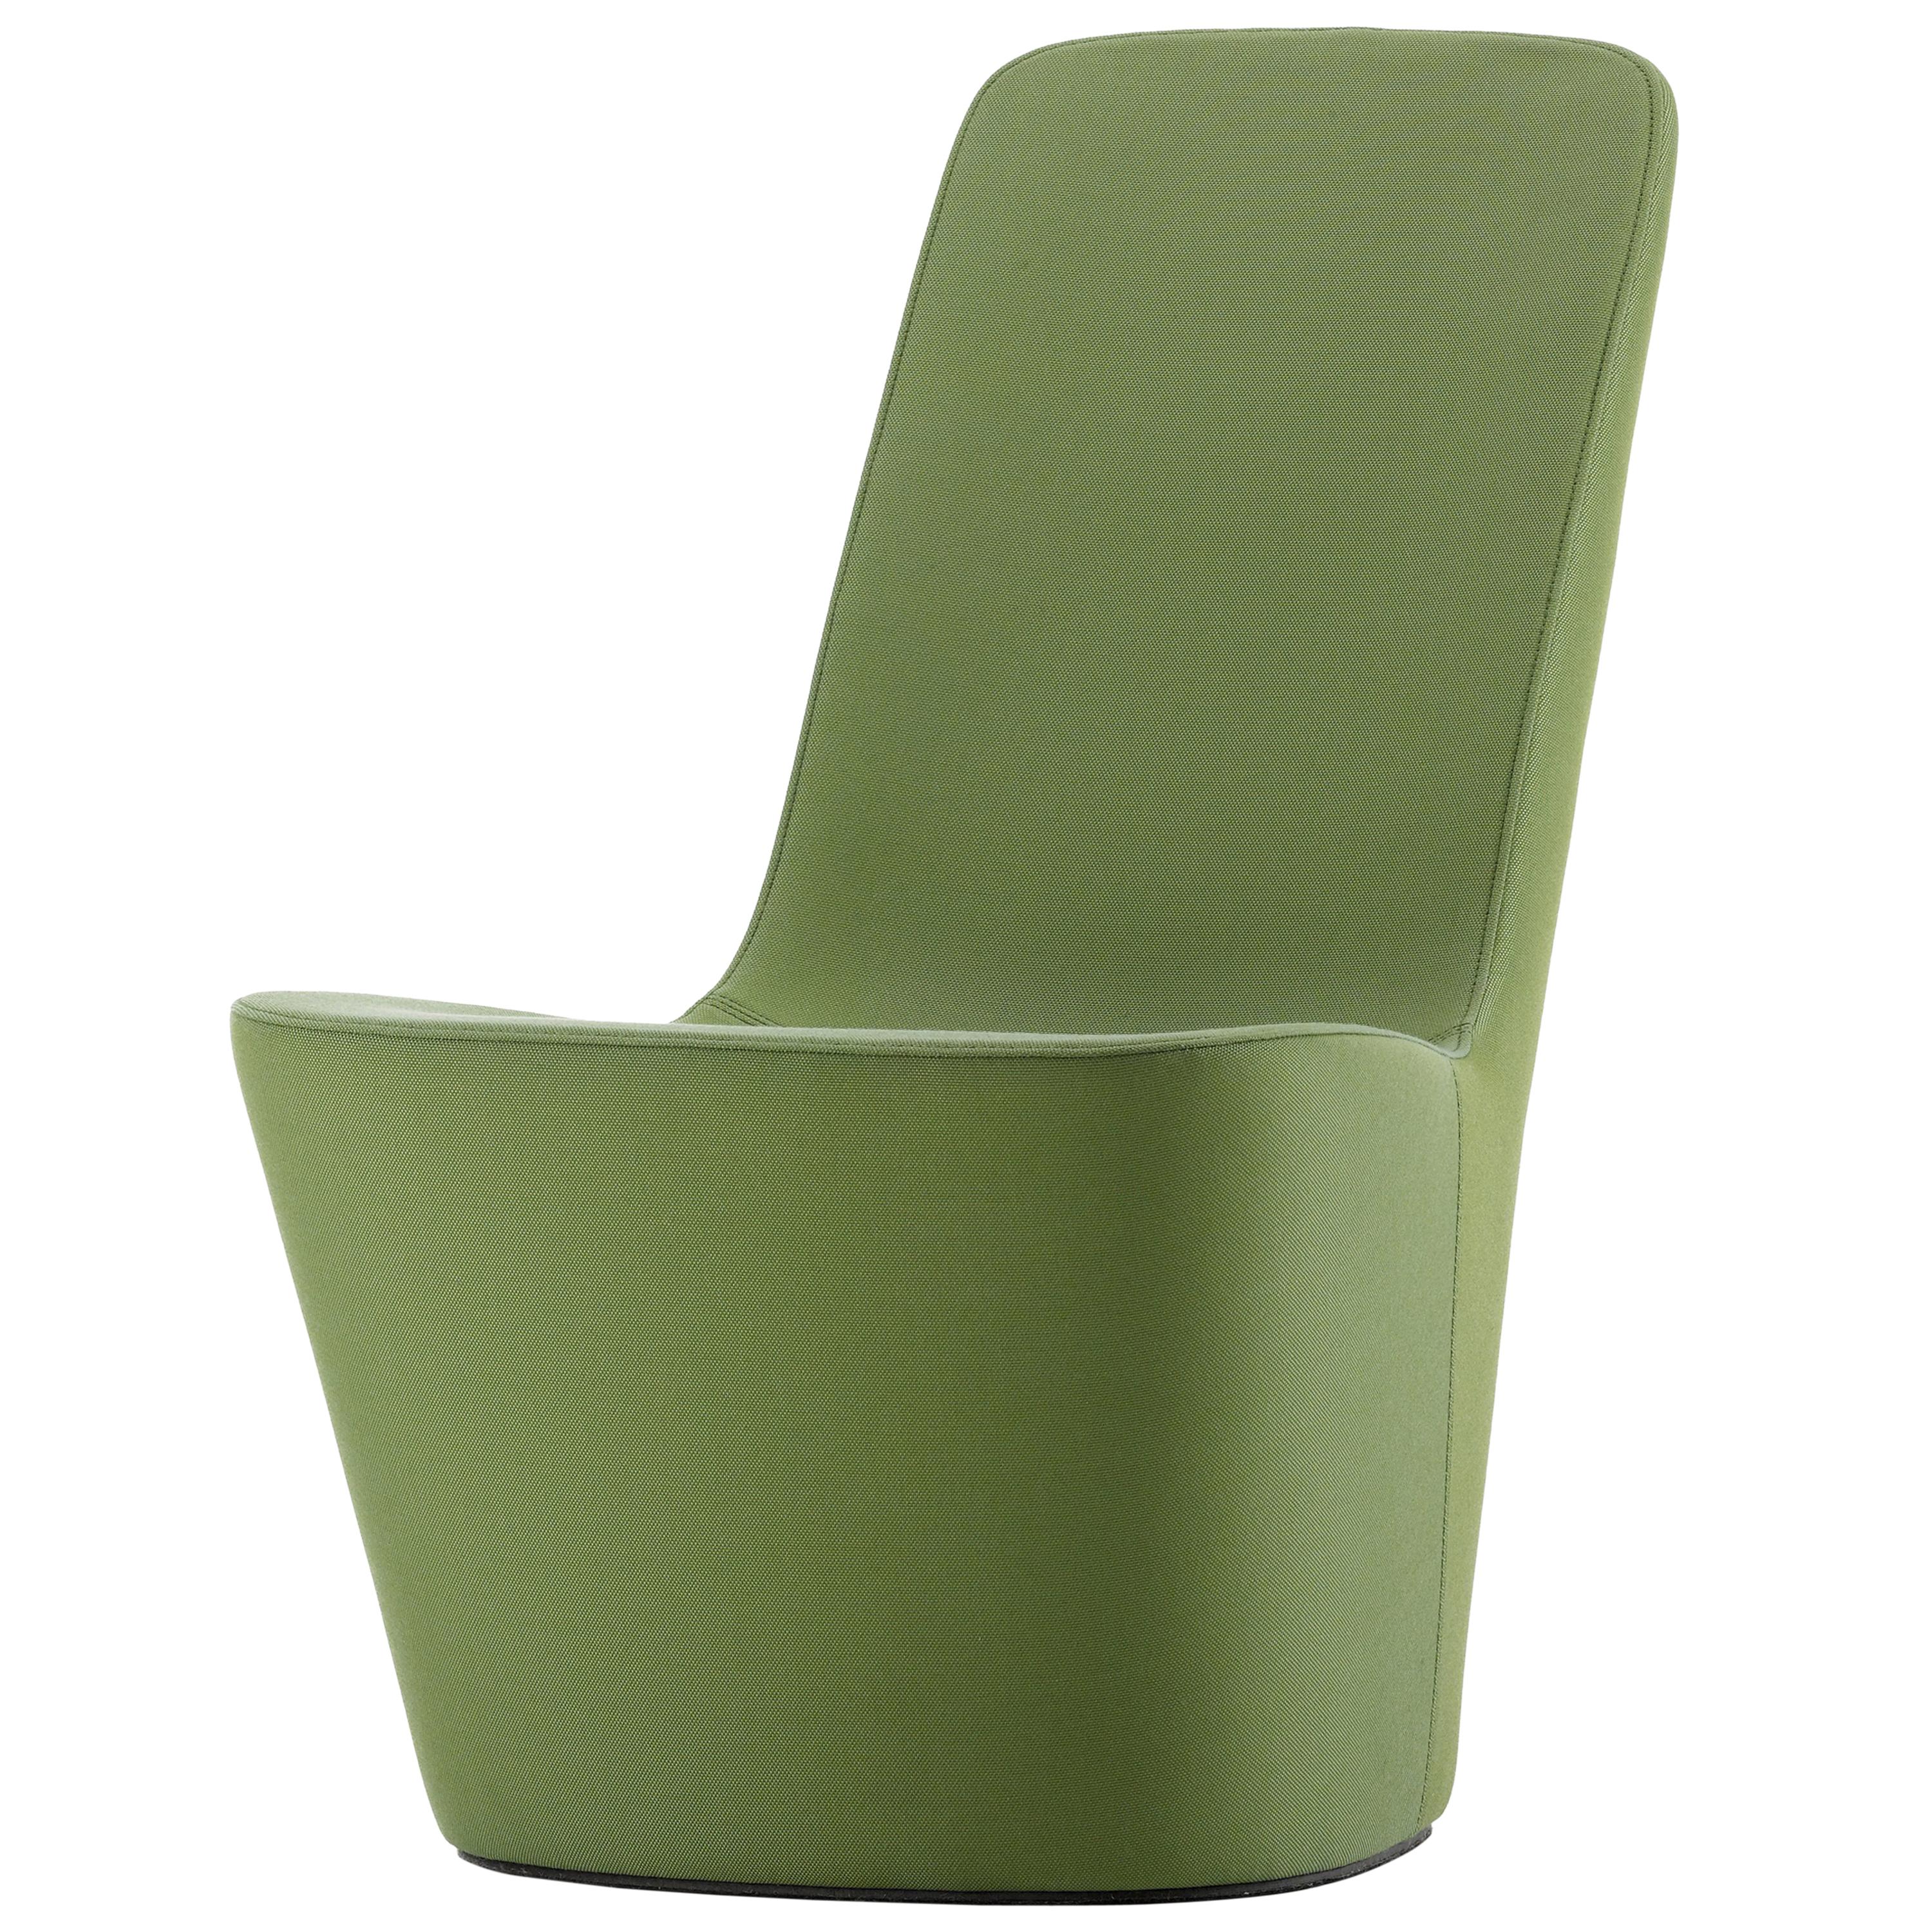 Vitra Monopod Chair in Grass Green & Forest by Jasper Morrison For Sale